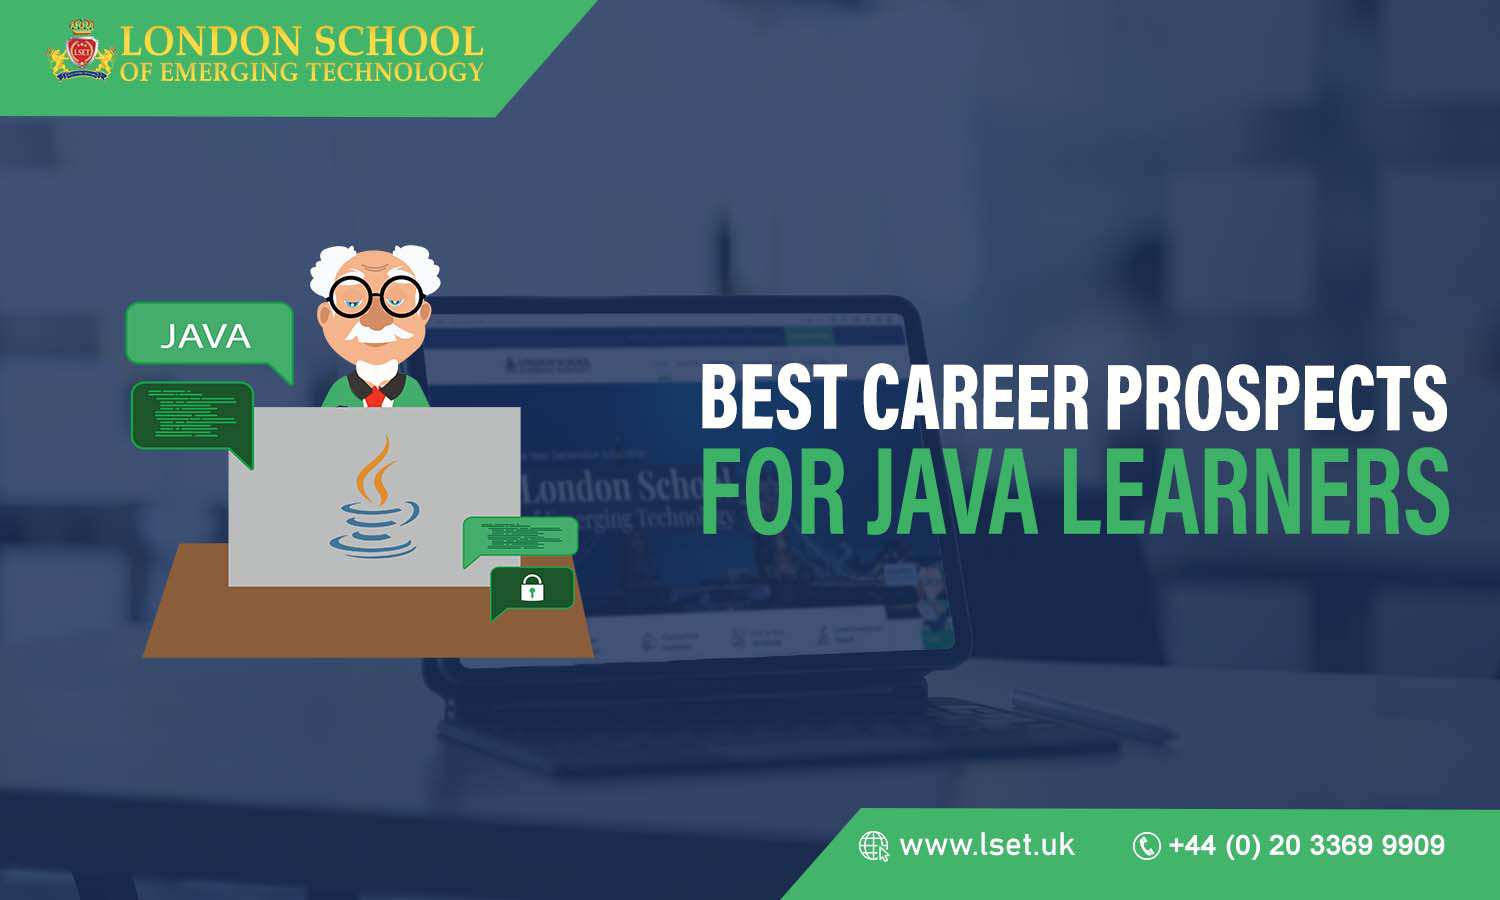 Best Career Prospects For Java Learners